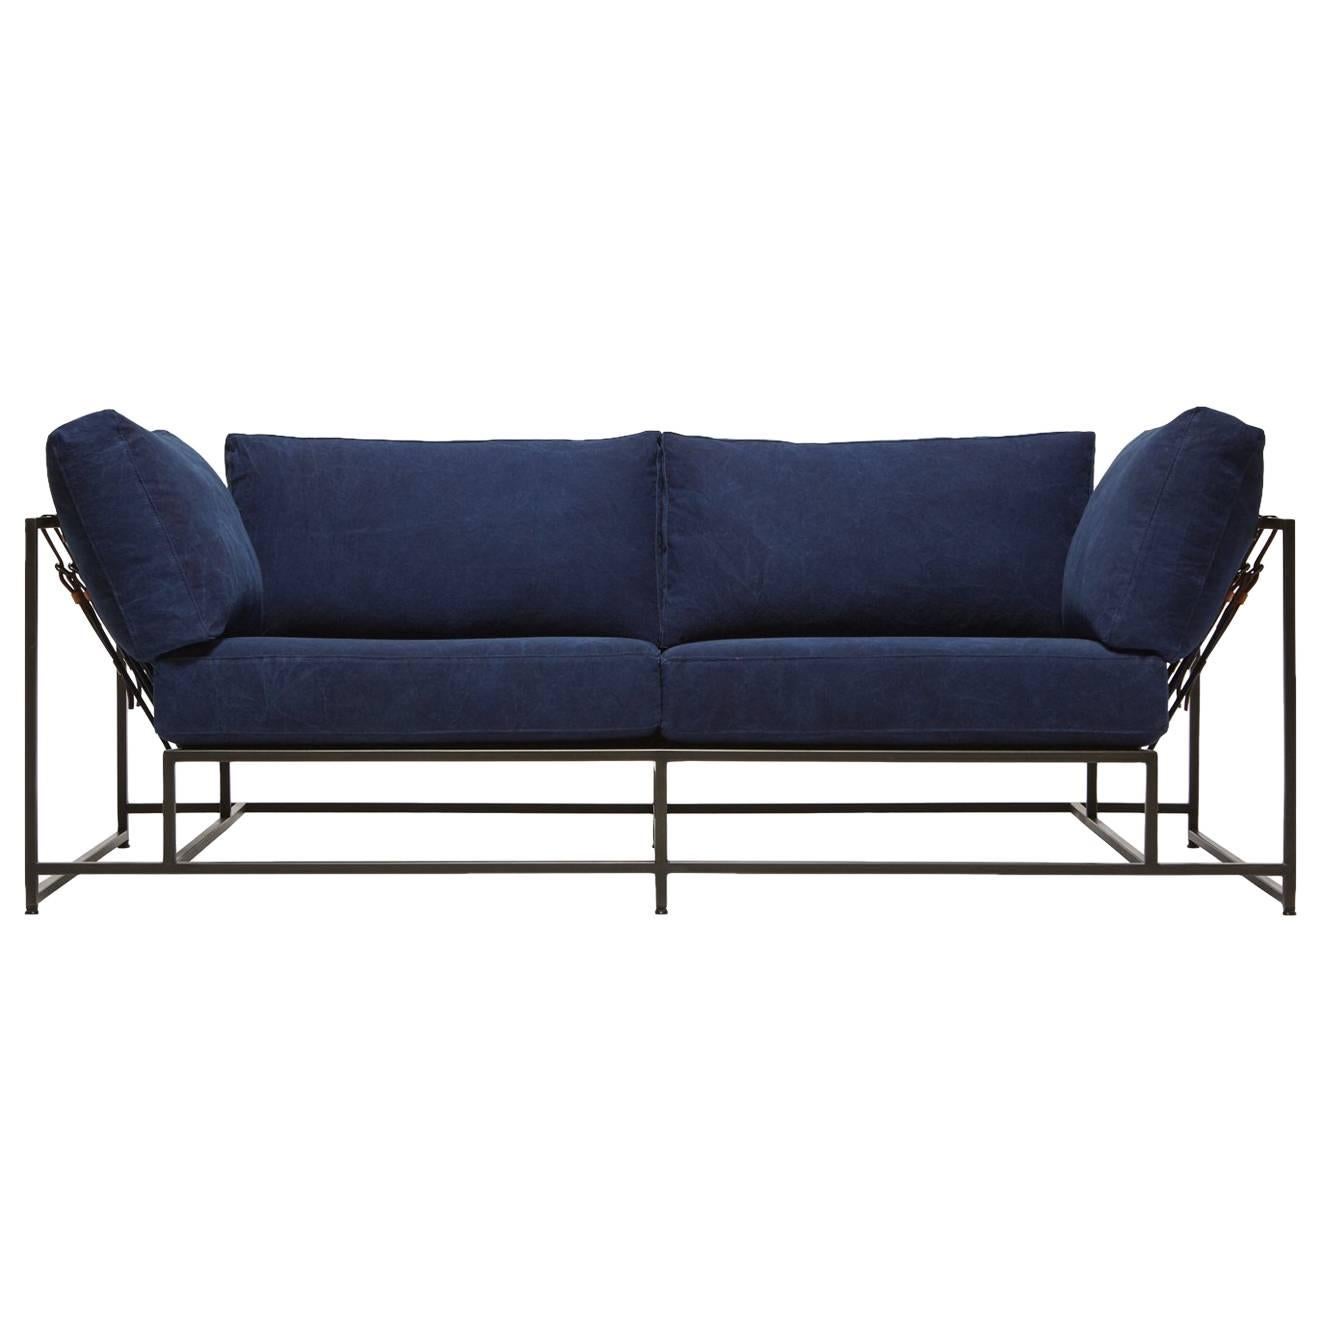 Hand-Dyed Indigo Canvas and Blackened Steel Two-Seat Sofa For Sale